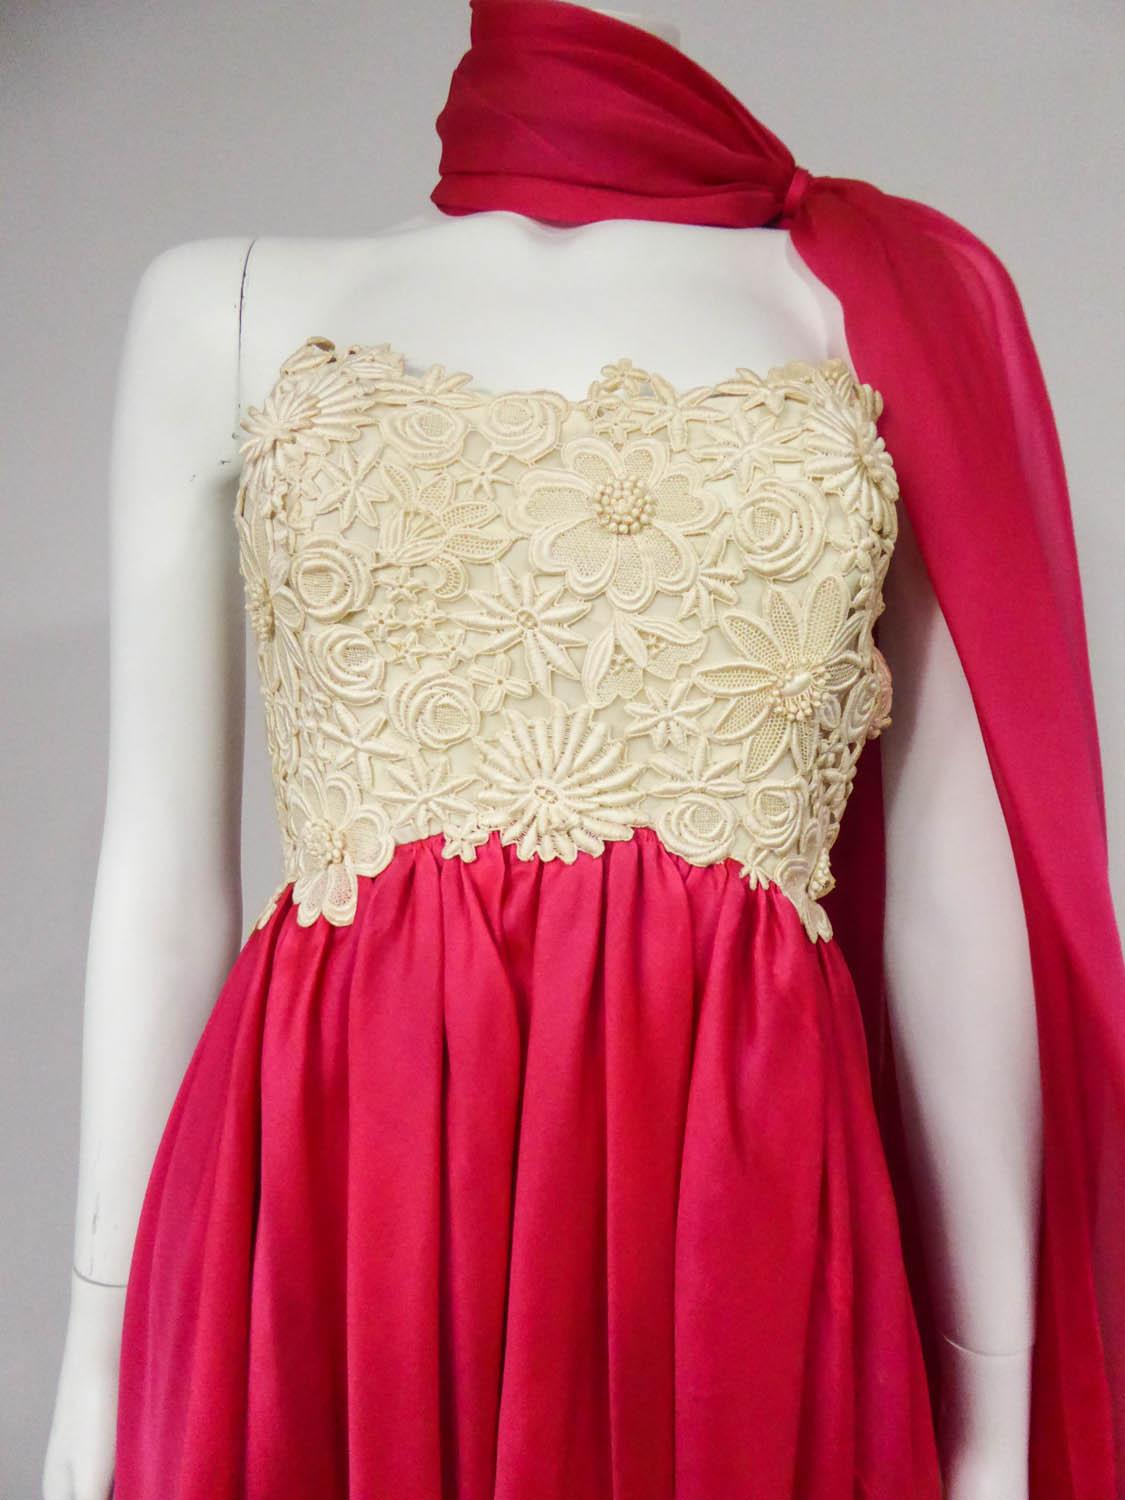 Women's A Jacques Griffe French Couture Evening Dress in Chiffon and Lace Circa 1958 For Sale